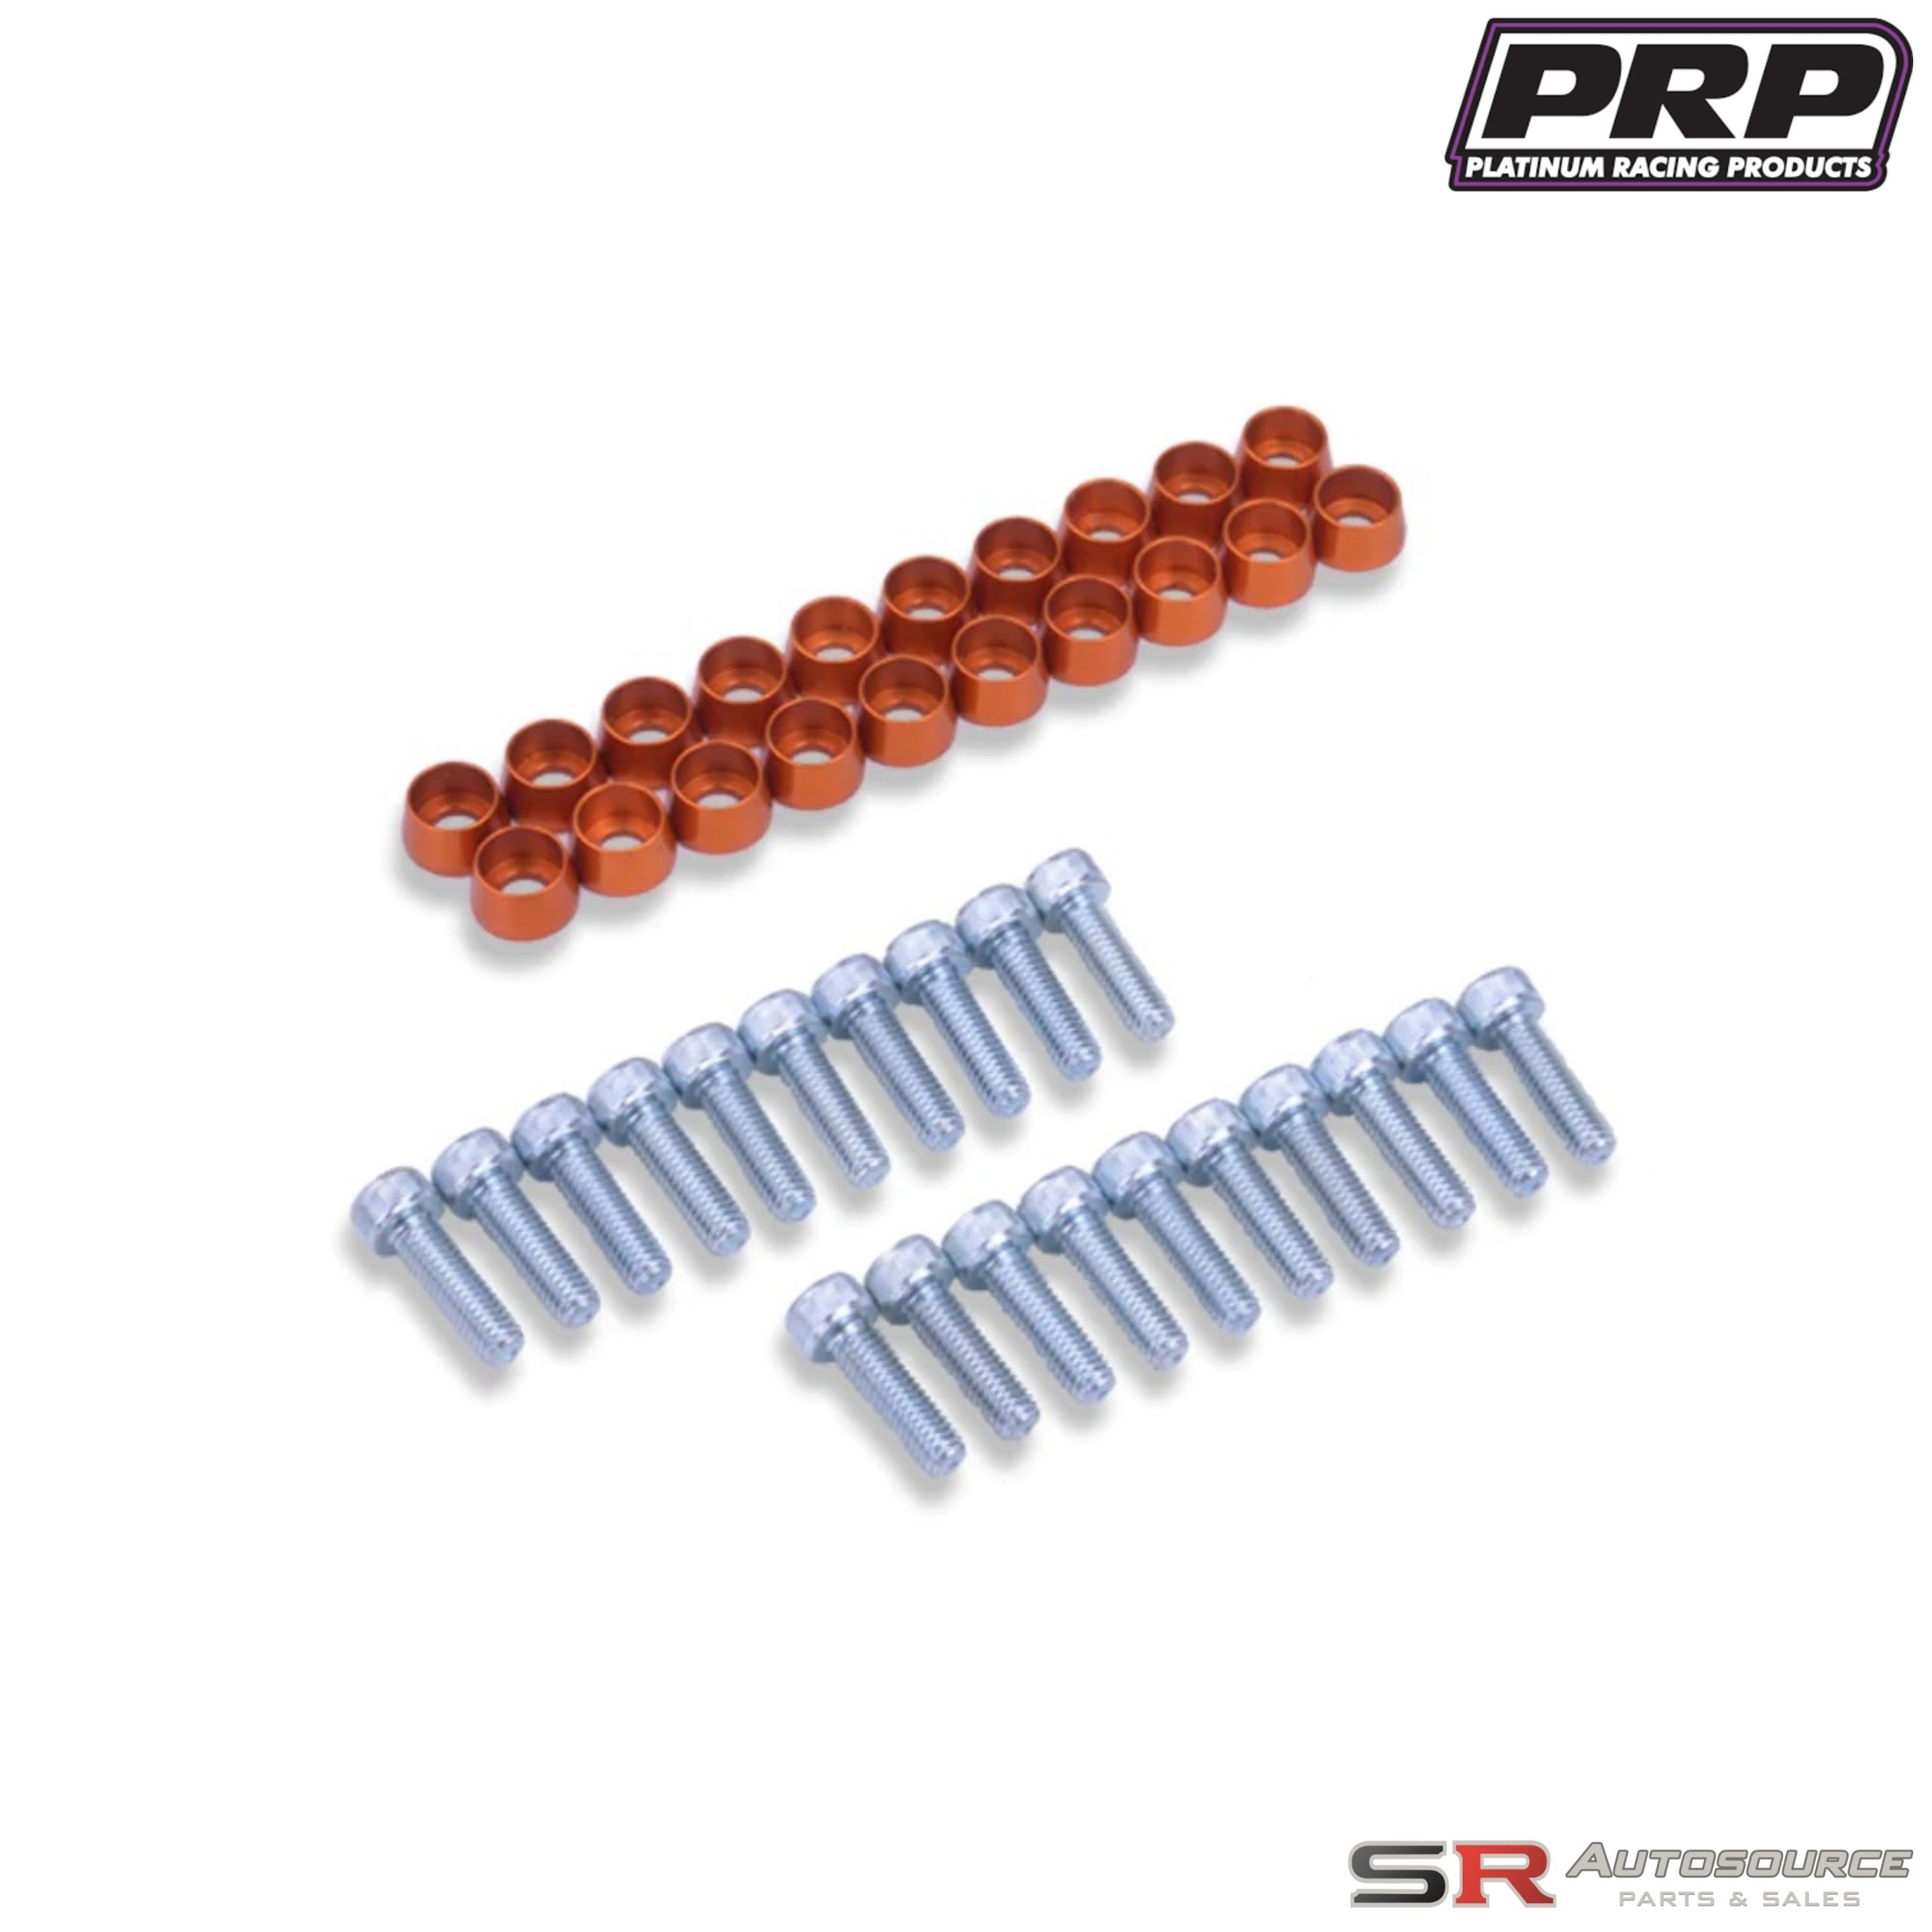 PRP Platinum Racing Products – RB20/25/26 Rocker Cover Dress Up Kit